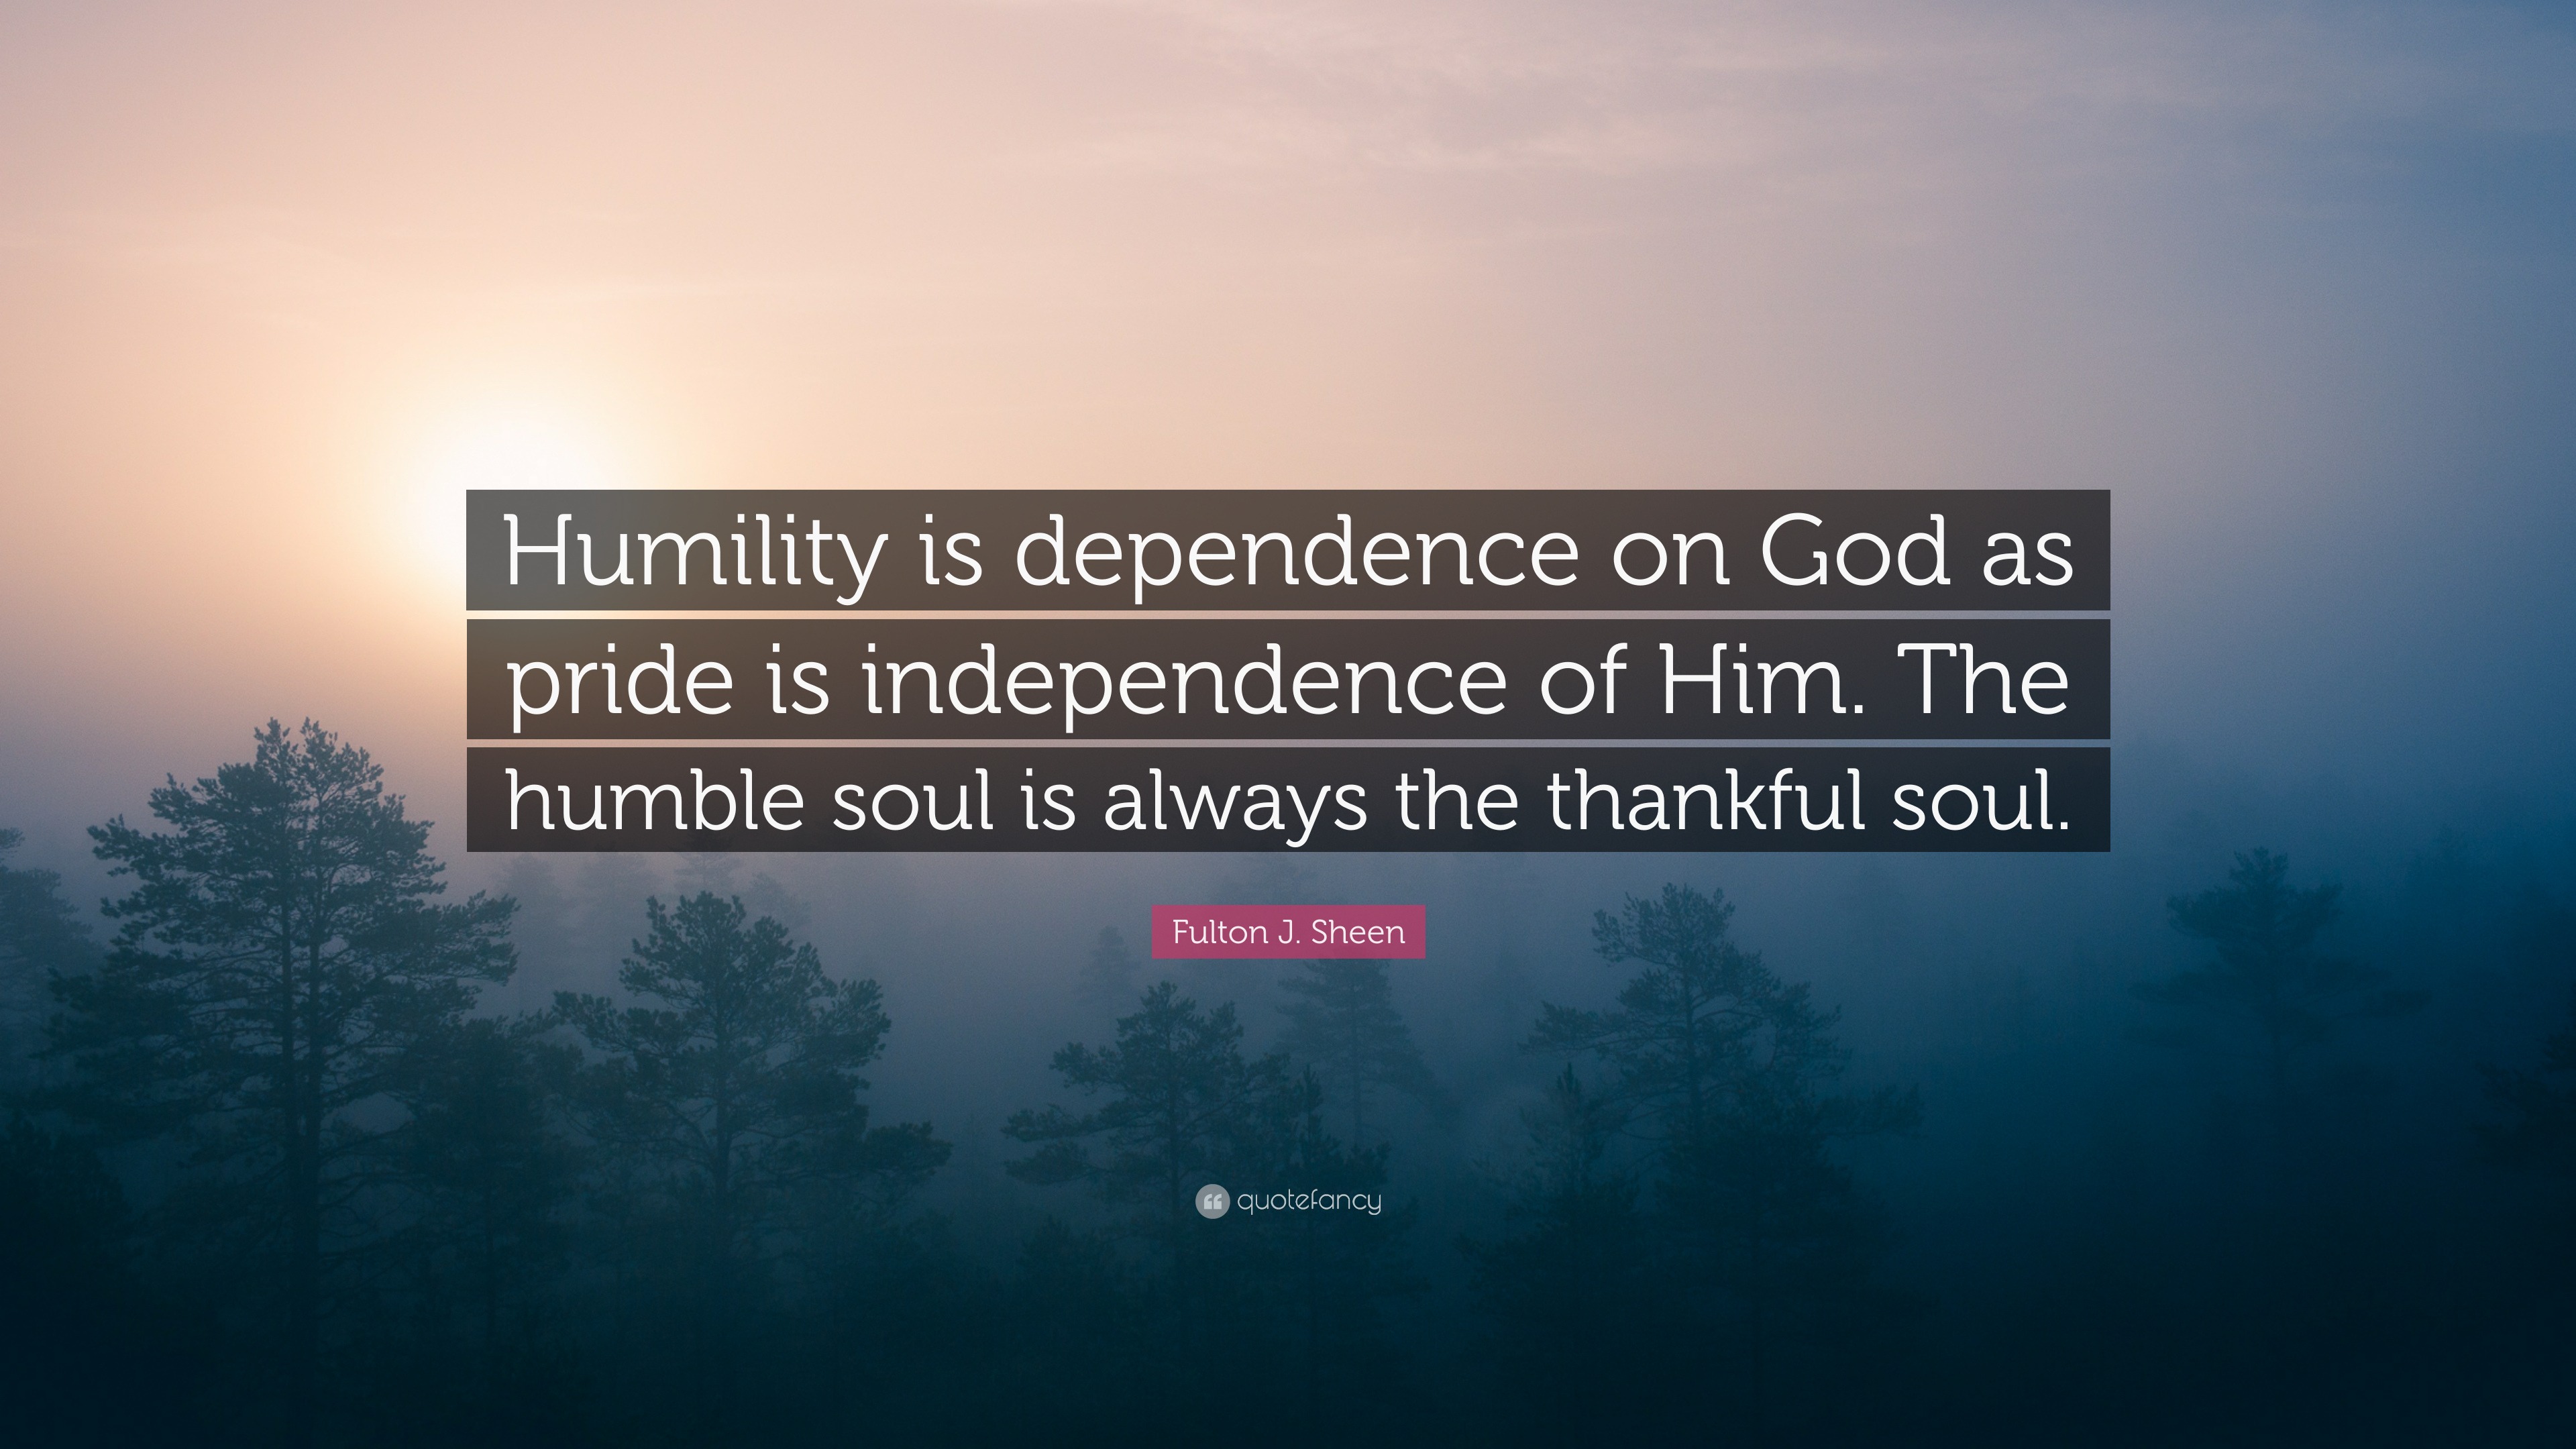 Fulton J. Sheen Quote: “Humility is dependence on God as pride is